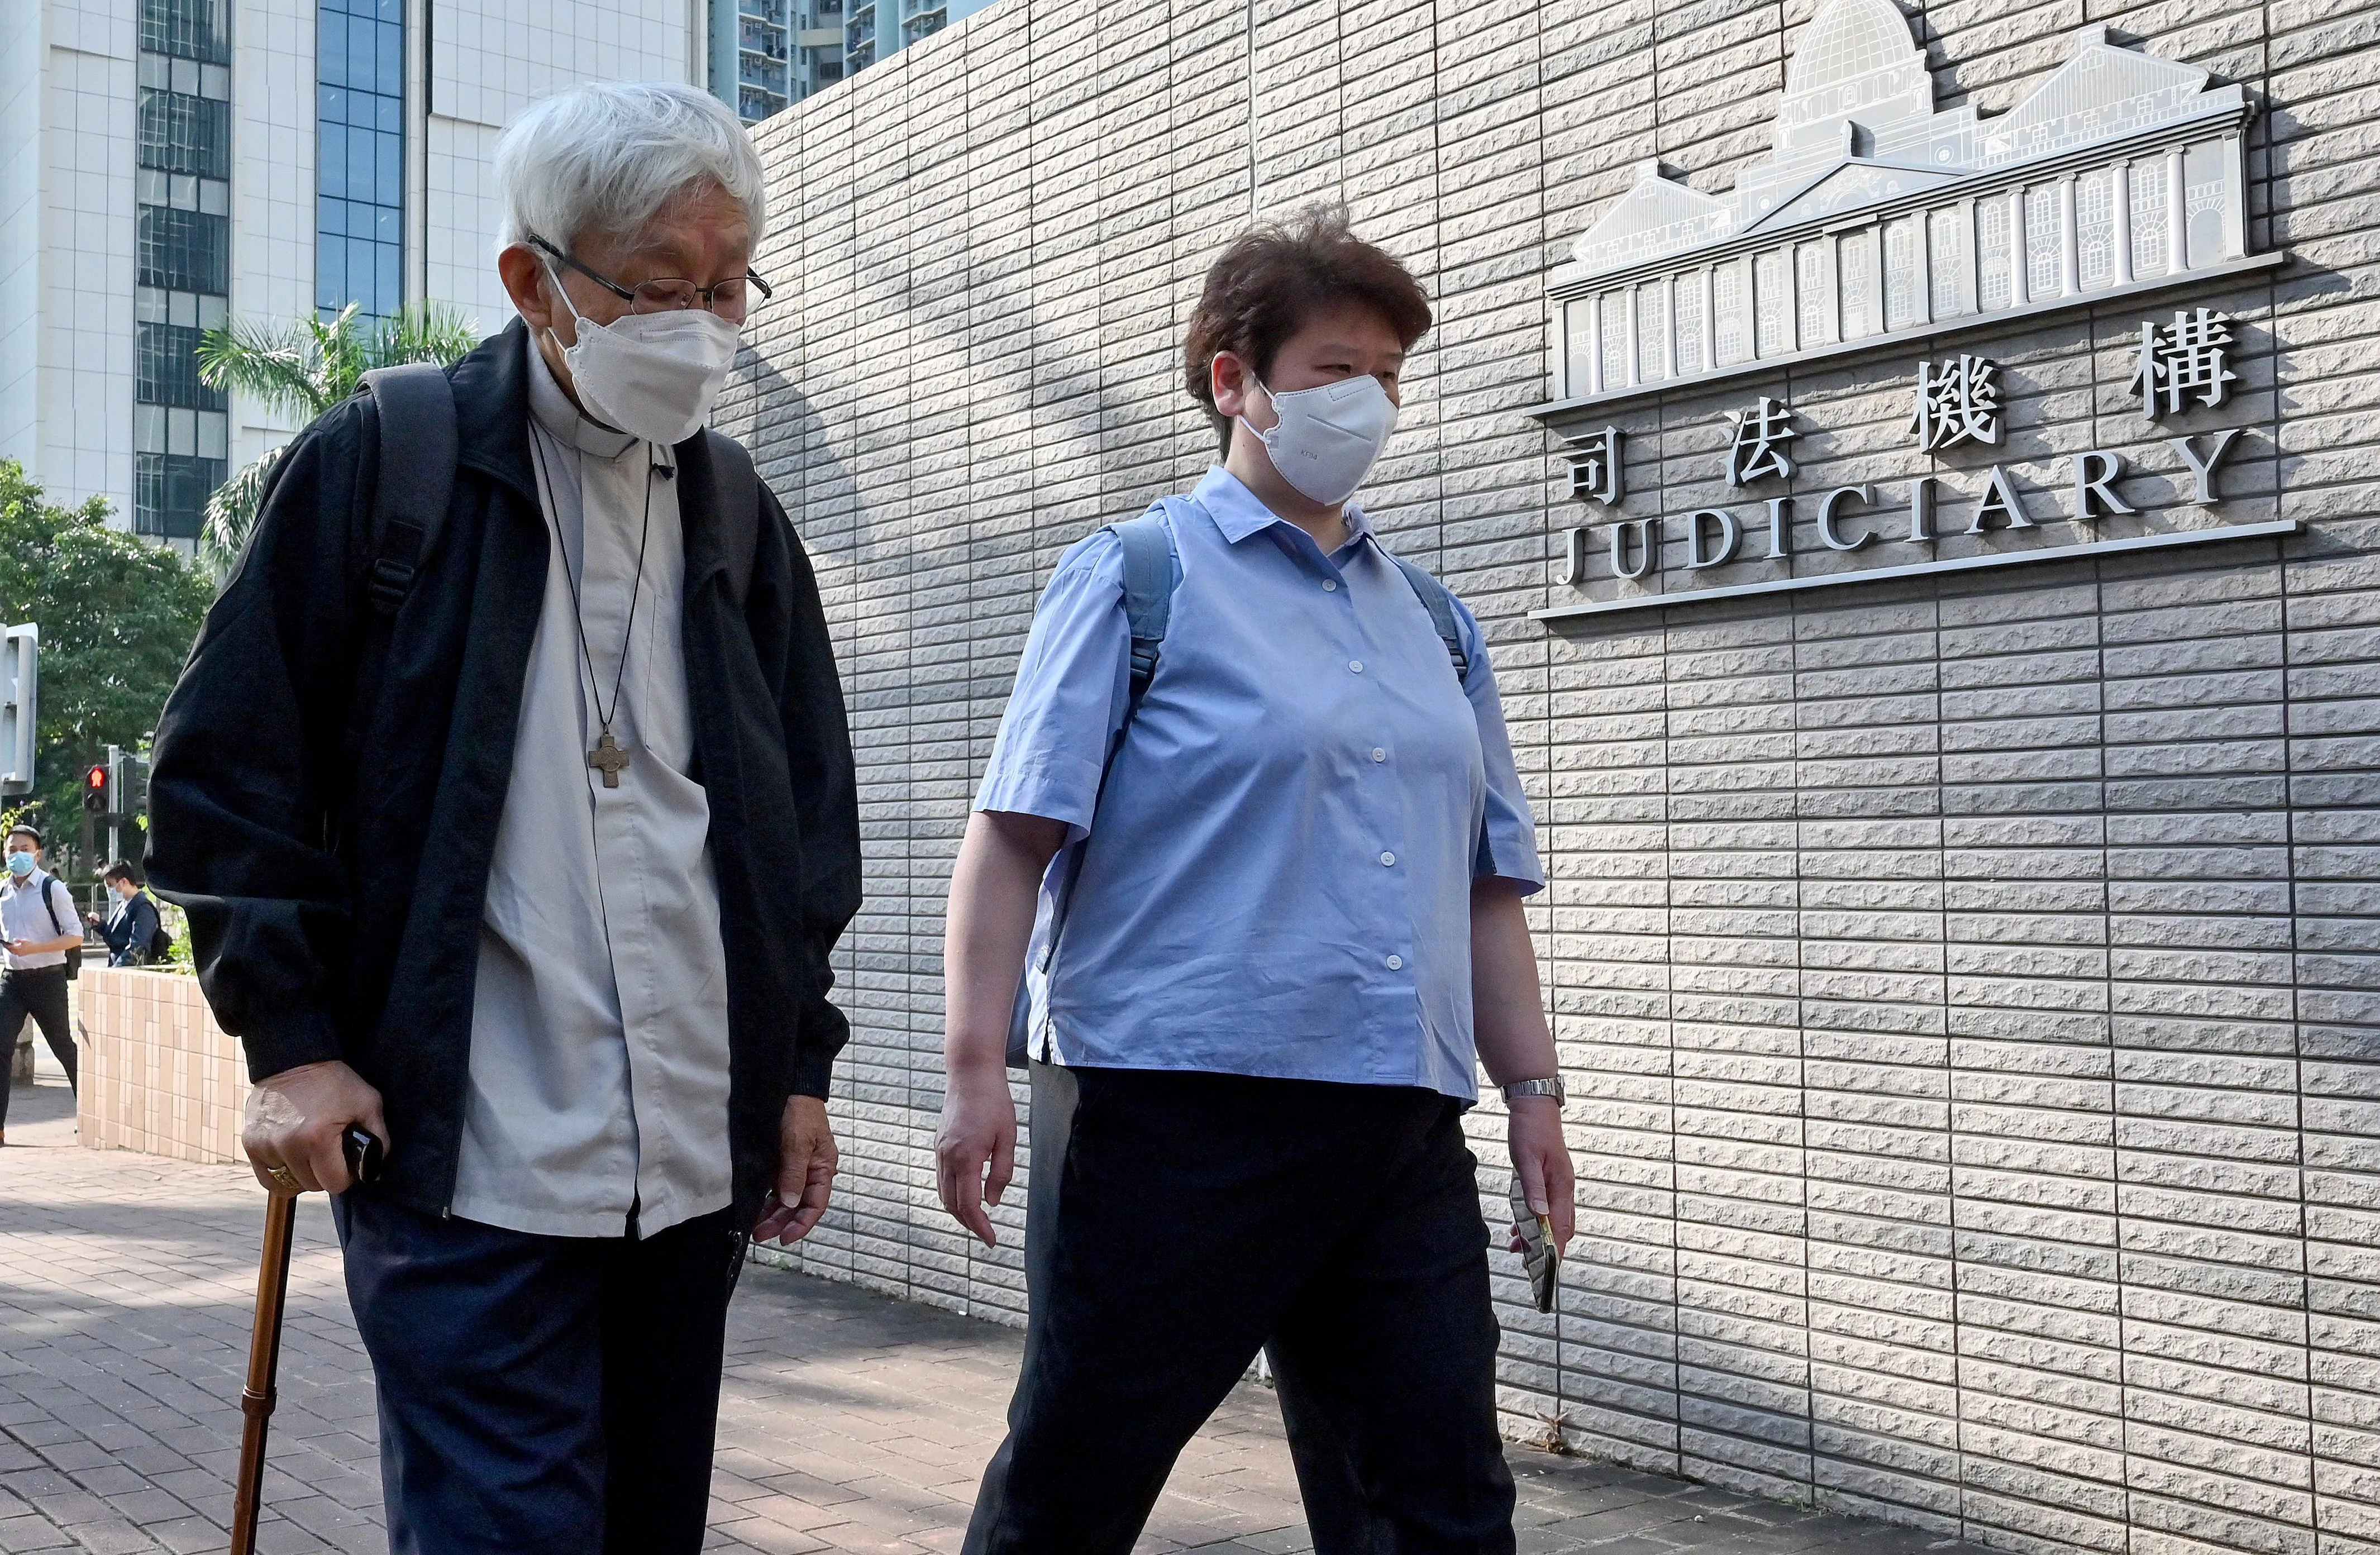 Cardinal Joseph Zen, one of Asia's highest-ranking Catholic clerics, arrives at a court for his trial in Hong Kong on Sept. 26, 2022.?w=200&h=150